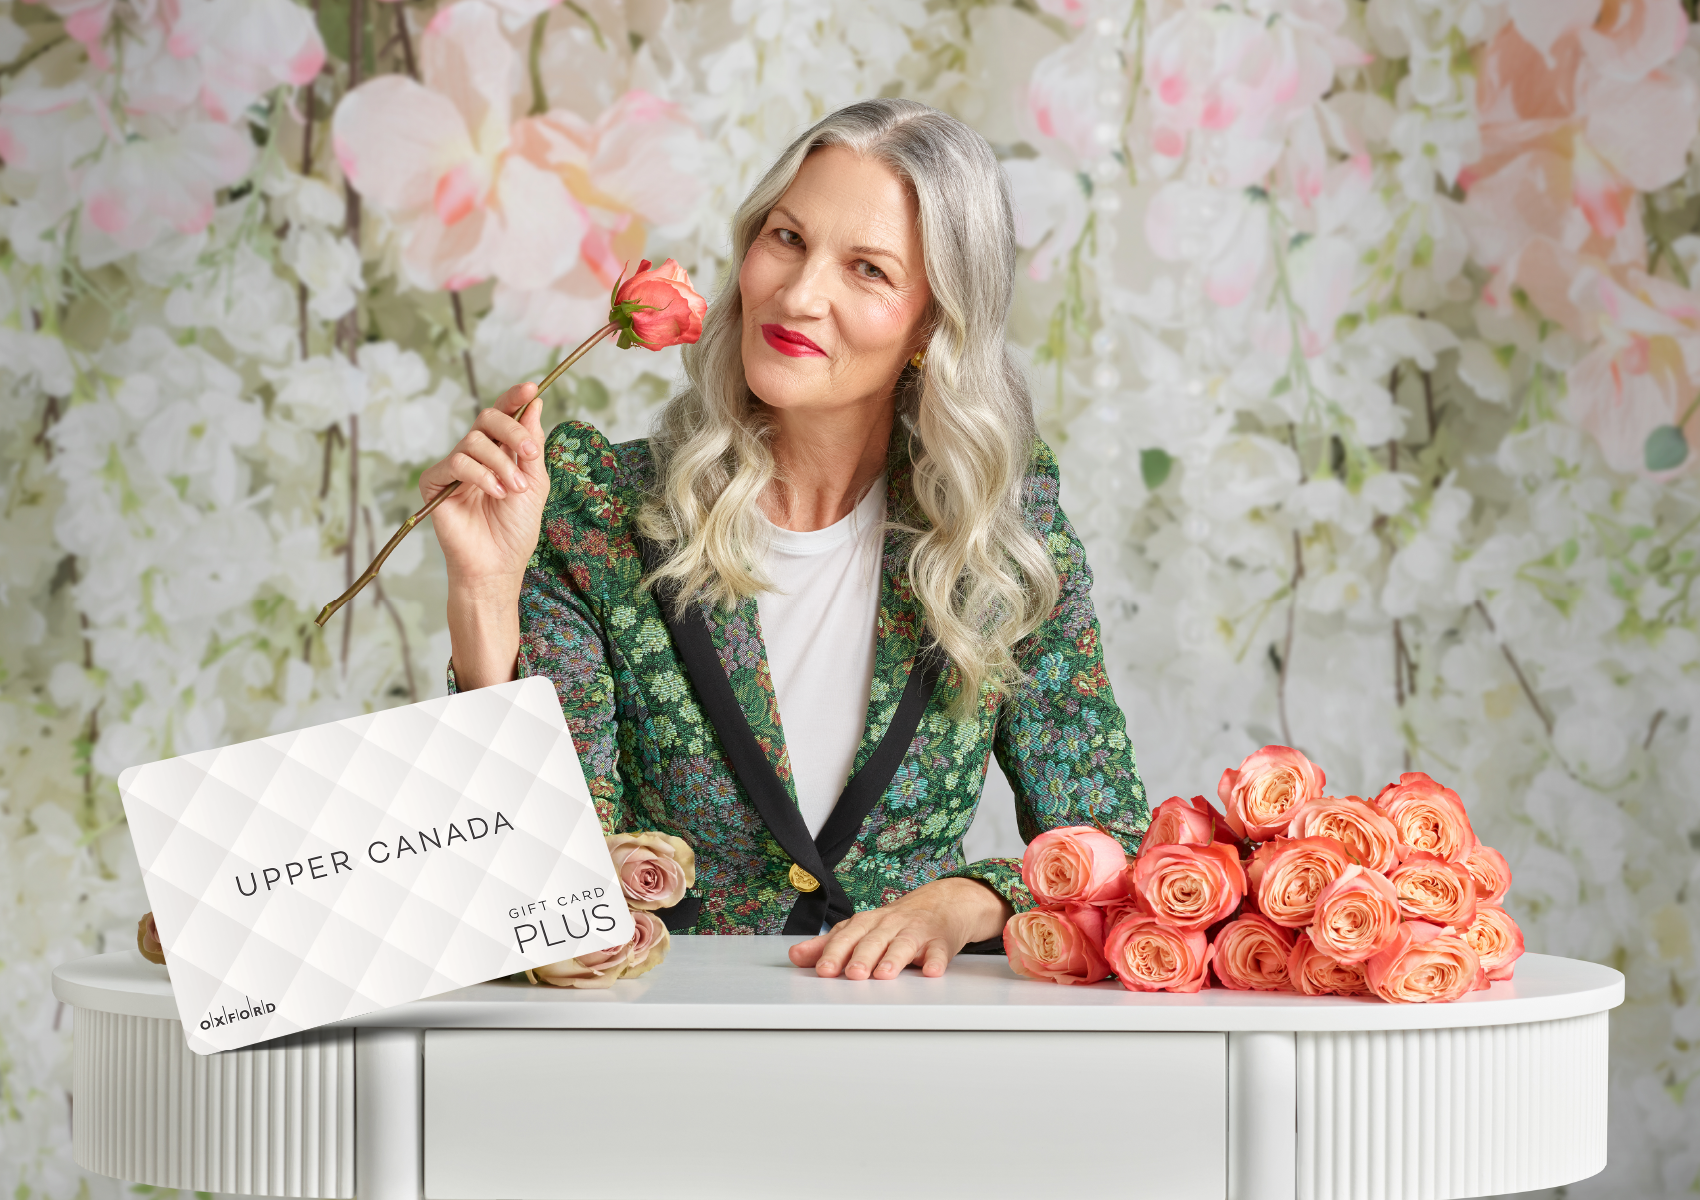 Woman holding a rose in front of an Upper Canada gift card